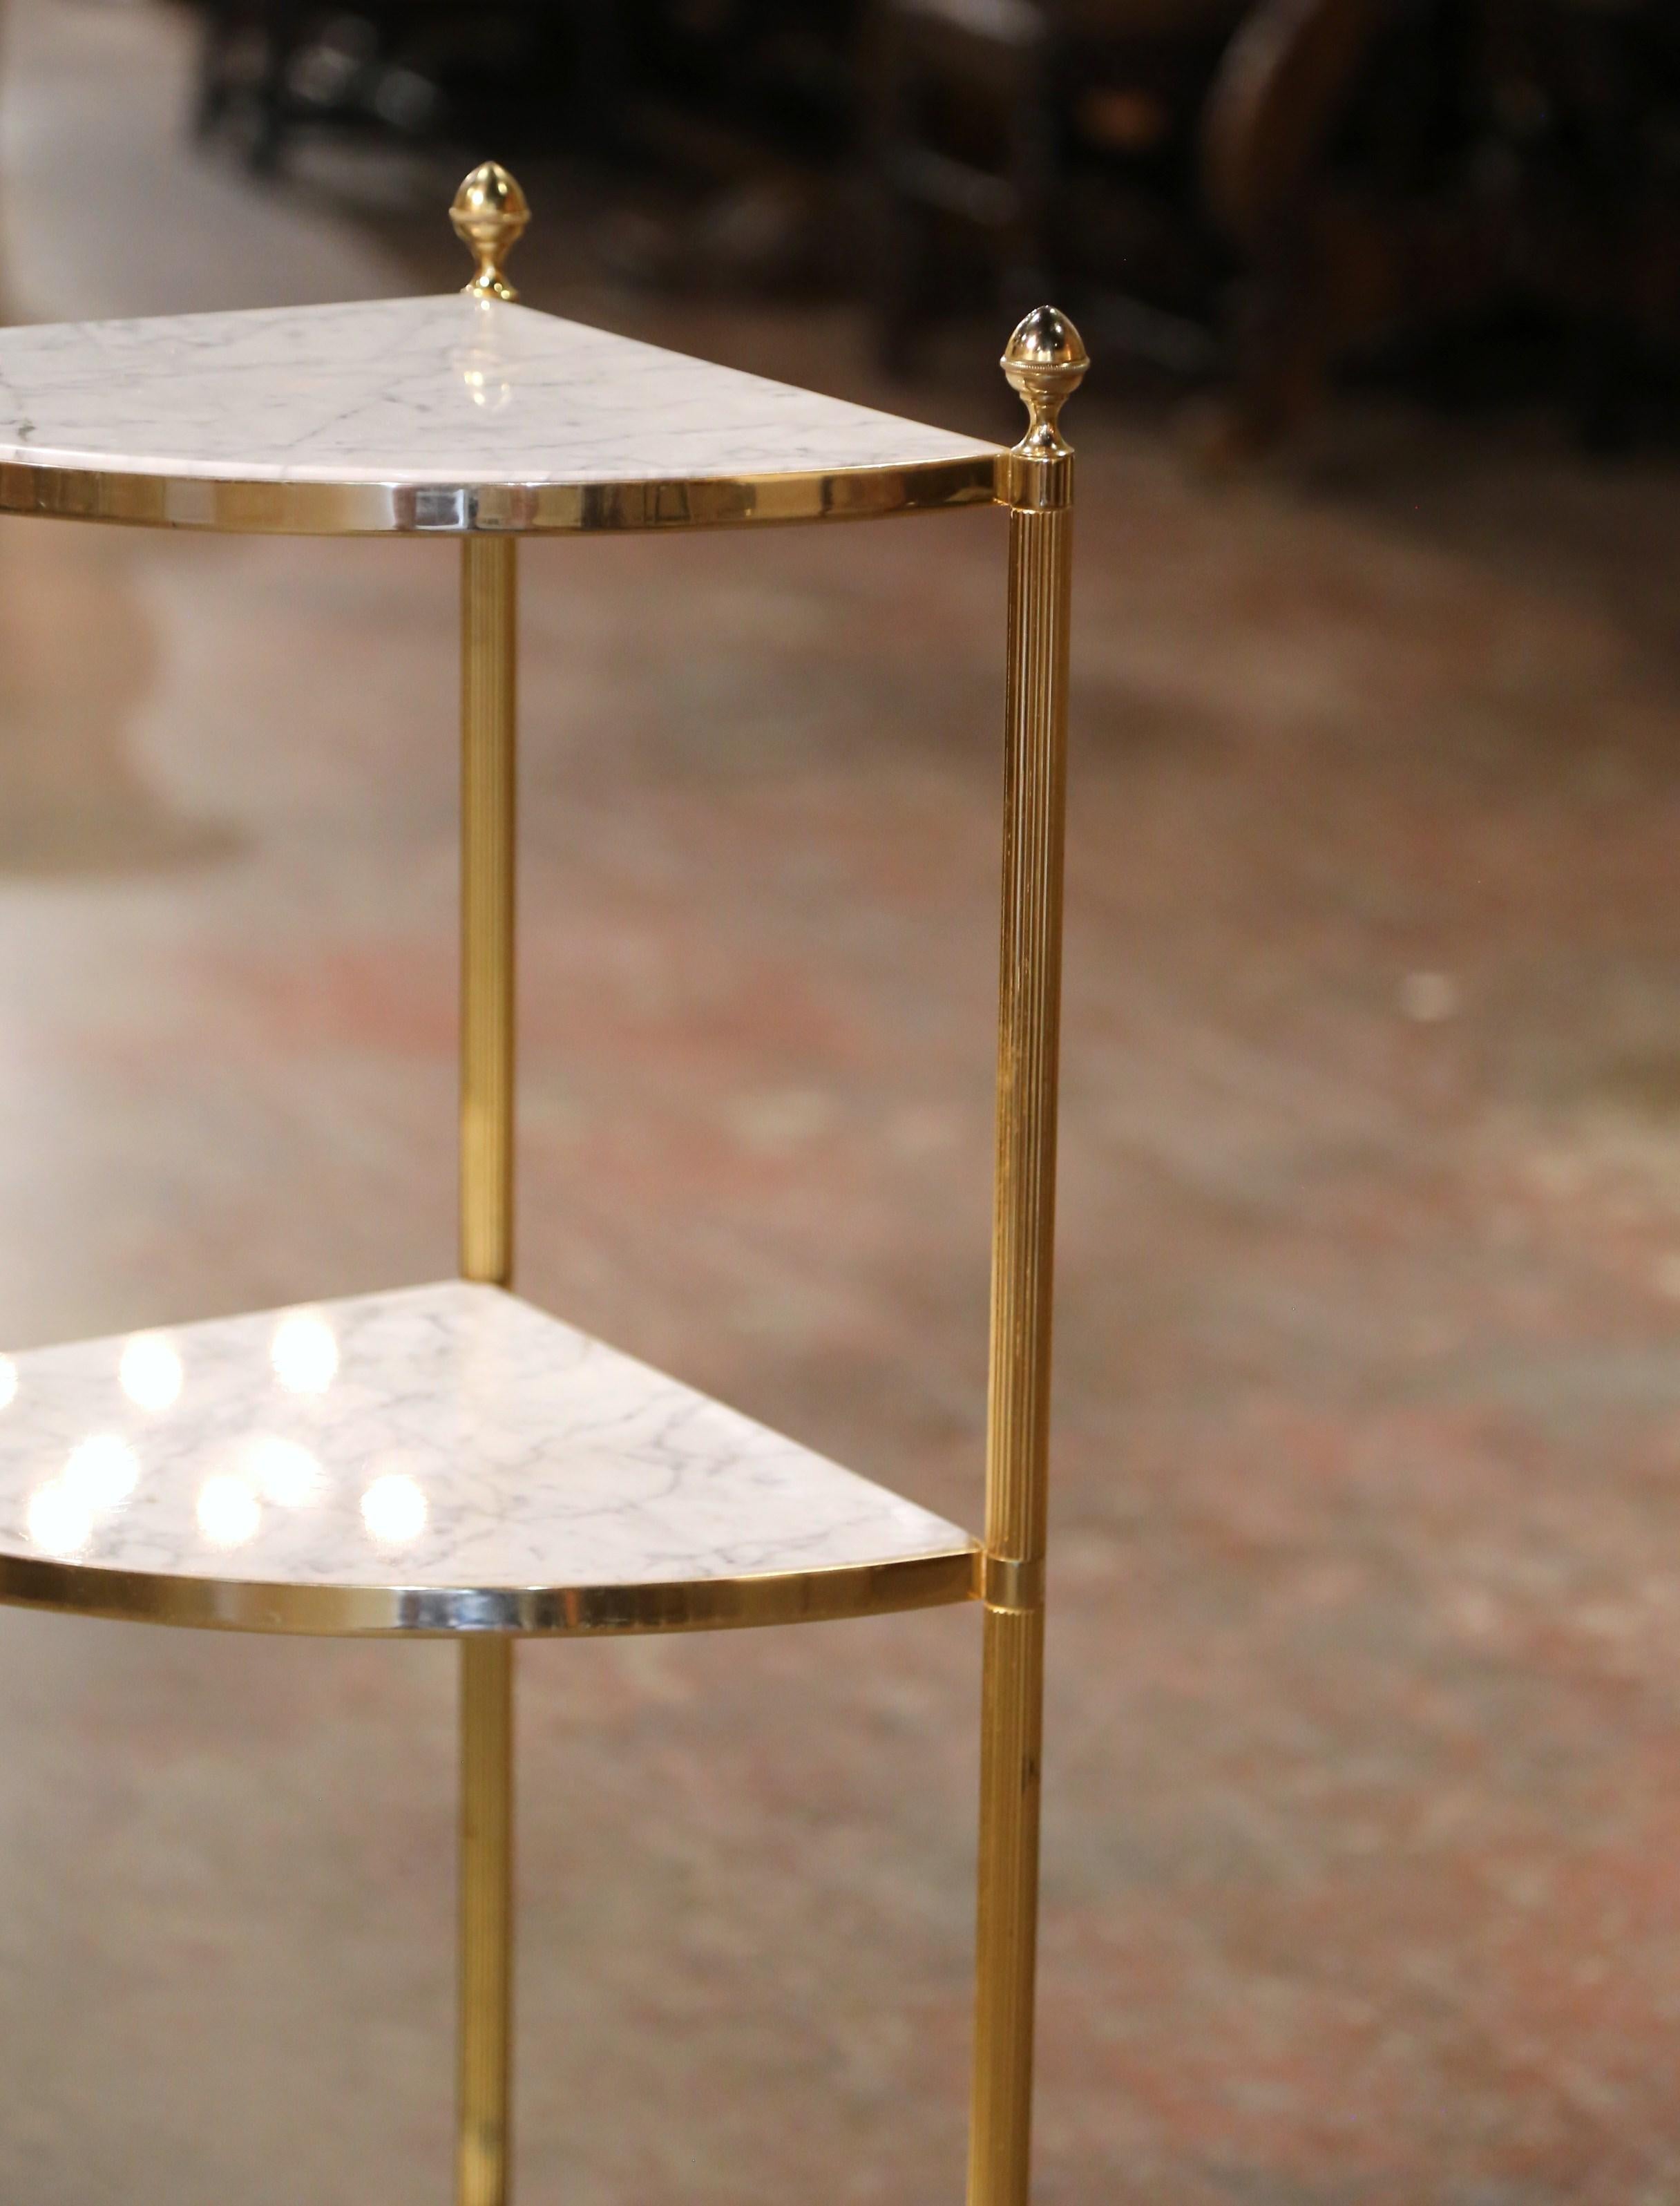 Polished Mid-Century Brass and Marble Corner Three-Tier Etagere Shelf